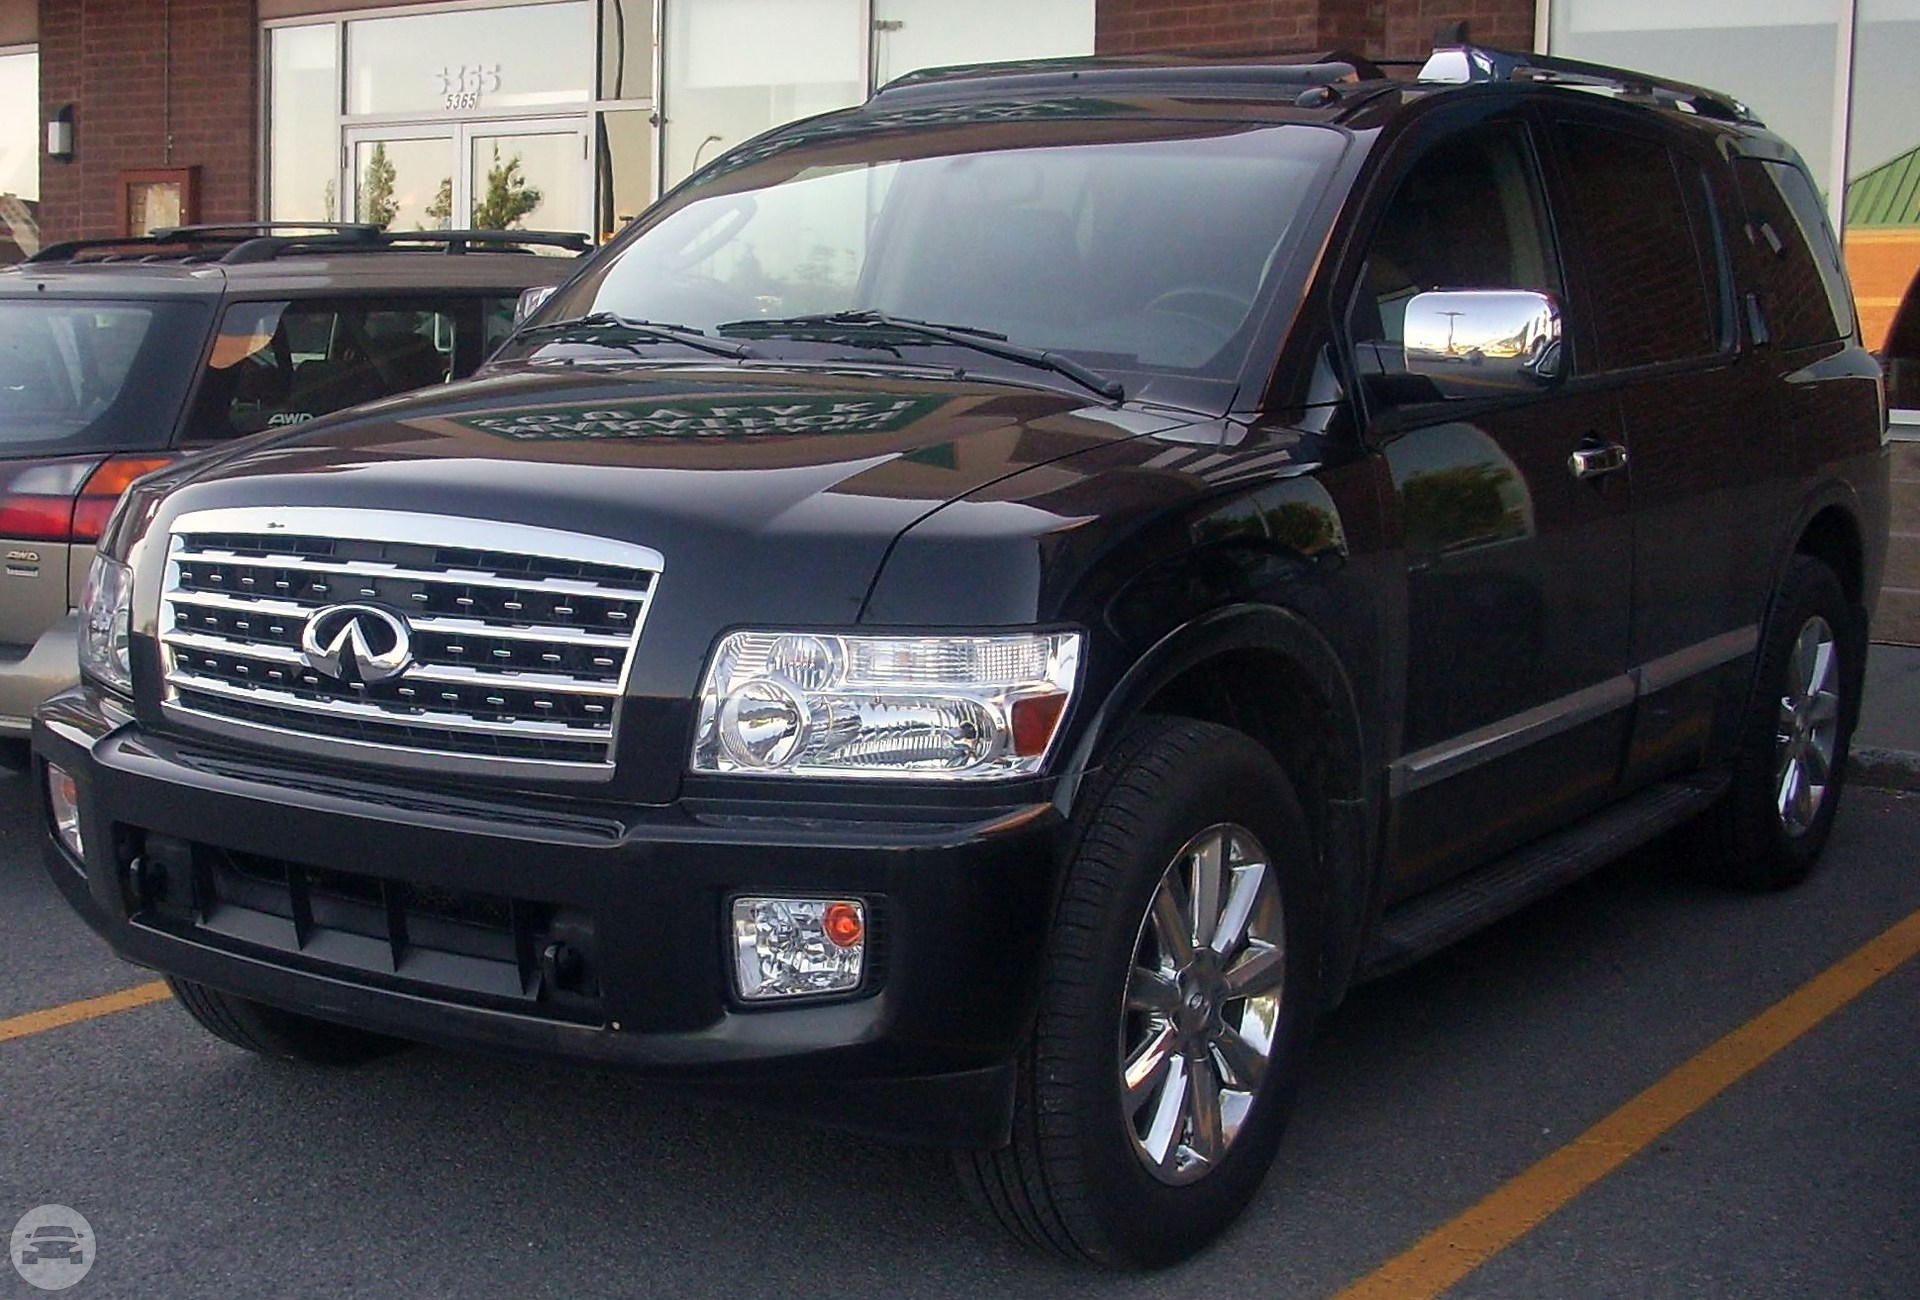 2008 Infiniti QX56 Black
SUV /
Indianapolis, IN

 / Hourly $0.00
